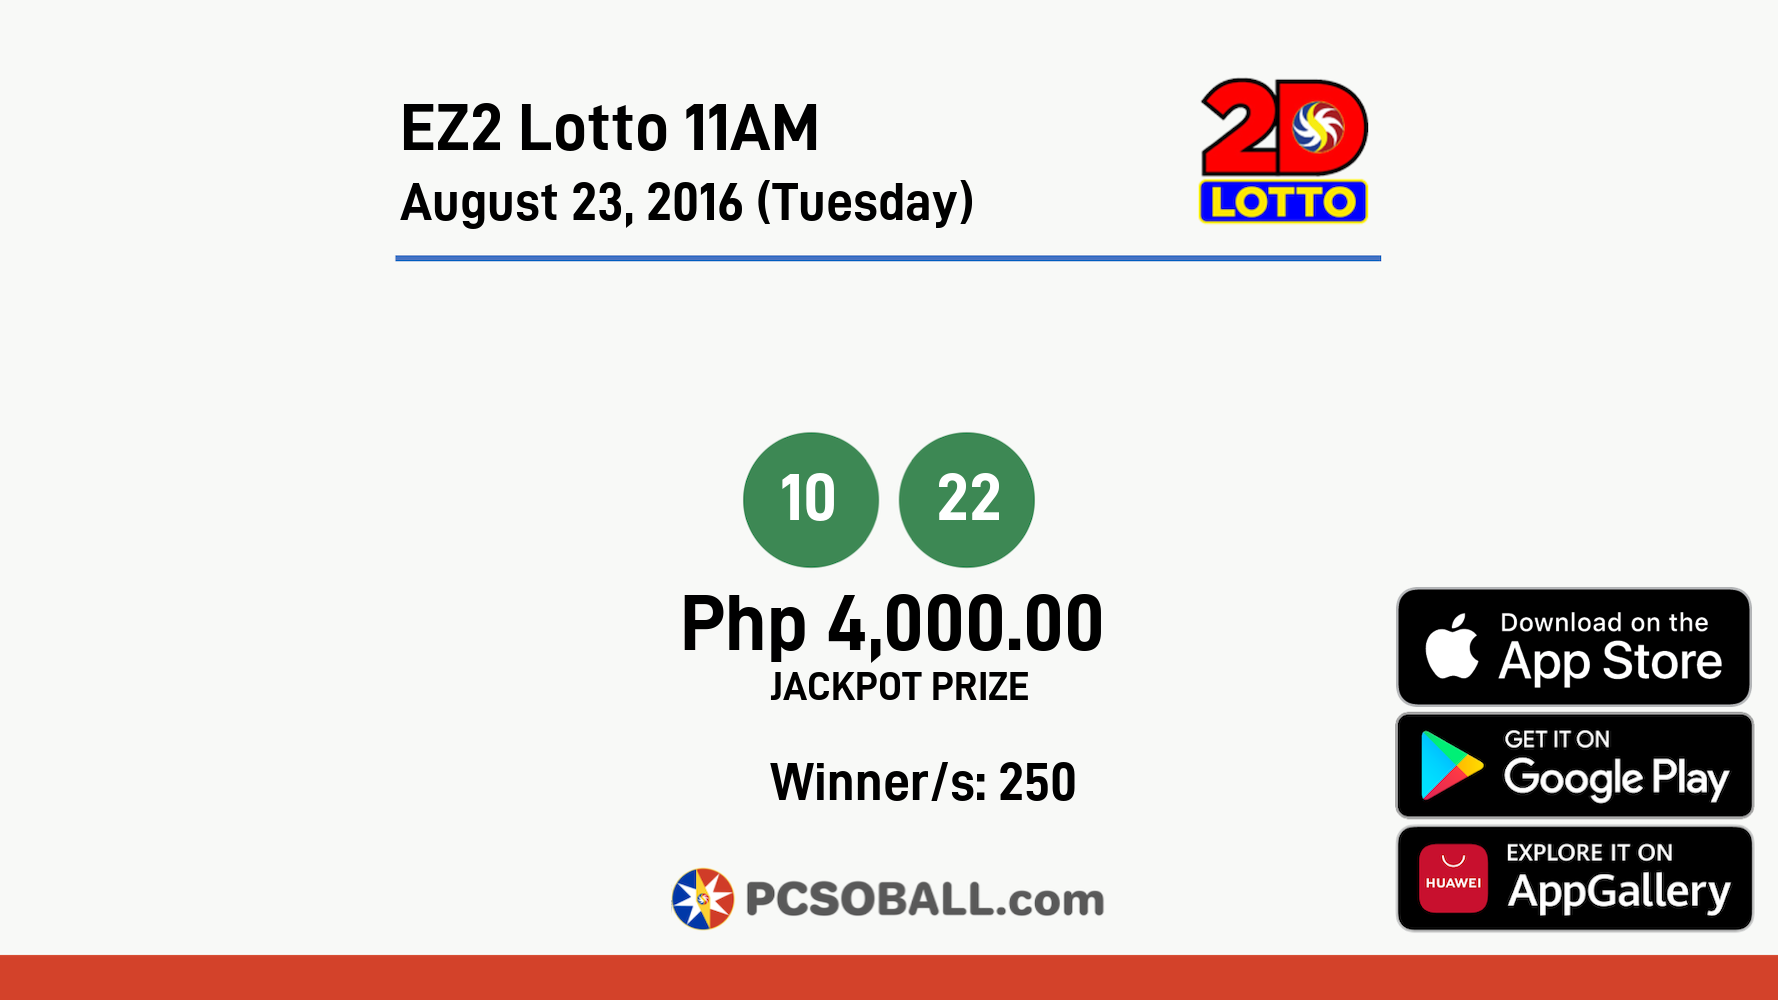 EZ2 Lotto 11AM August 23, 2016 (Tuesday) Result